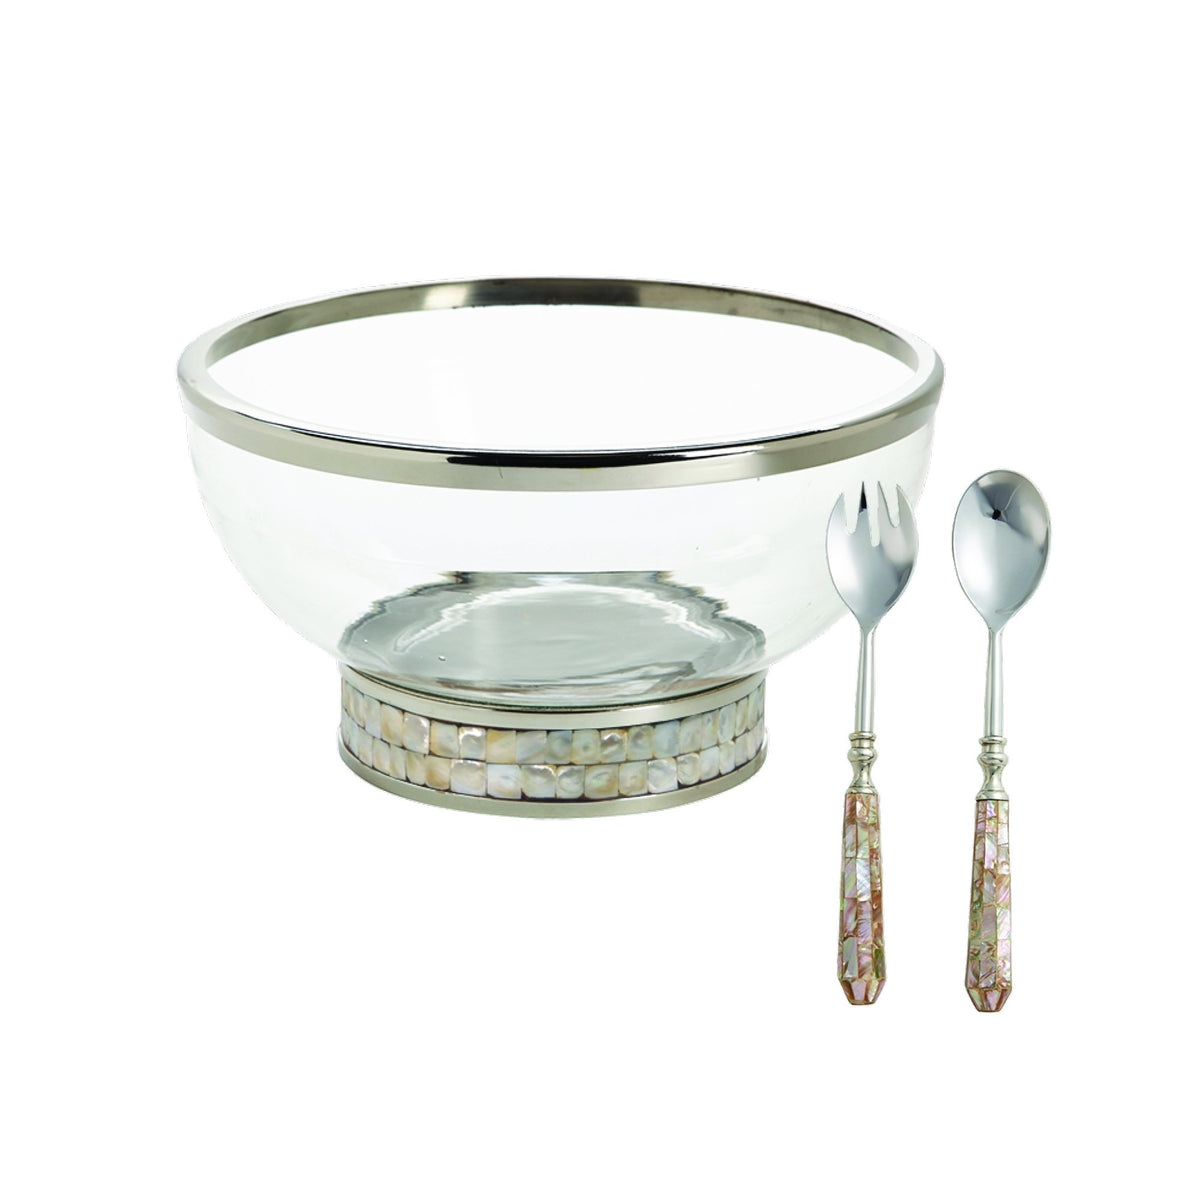 Set of Mother of Pearl Bowl and Salad Servers